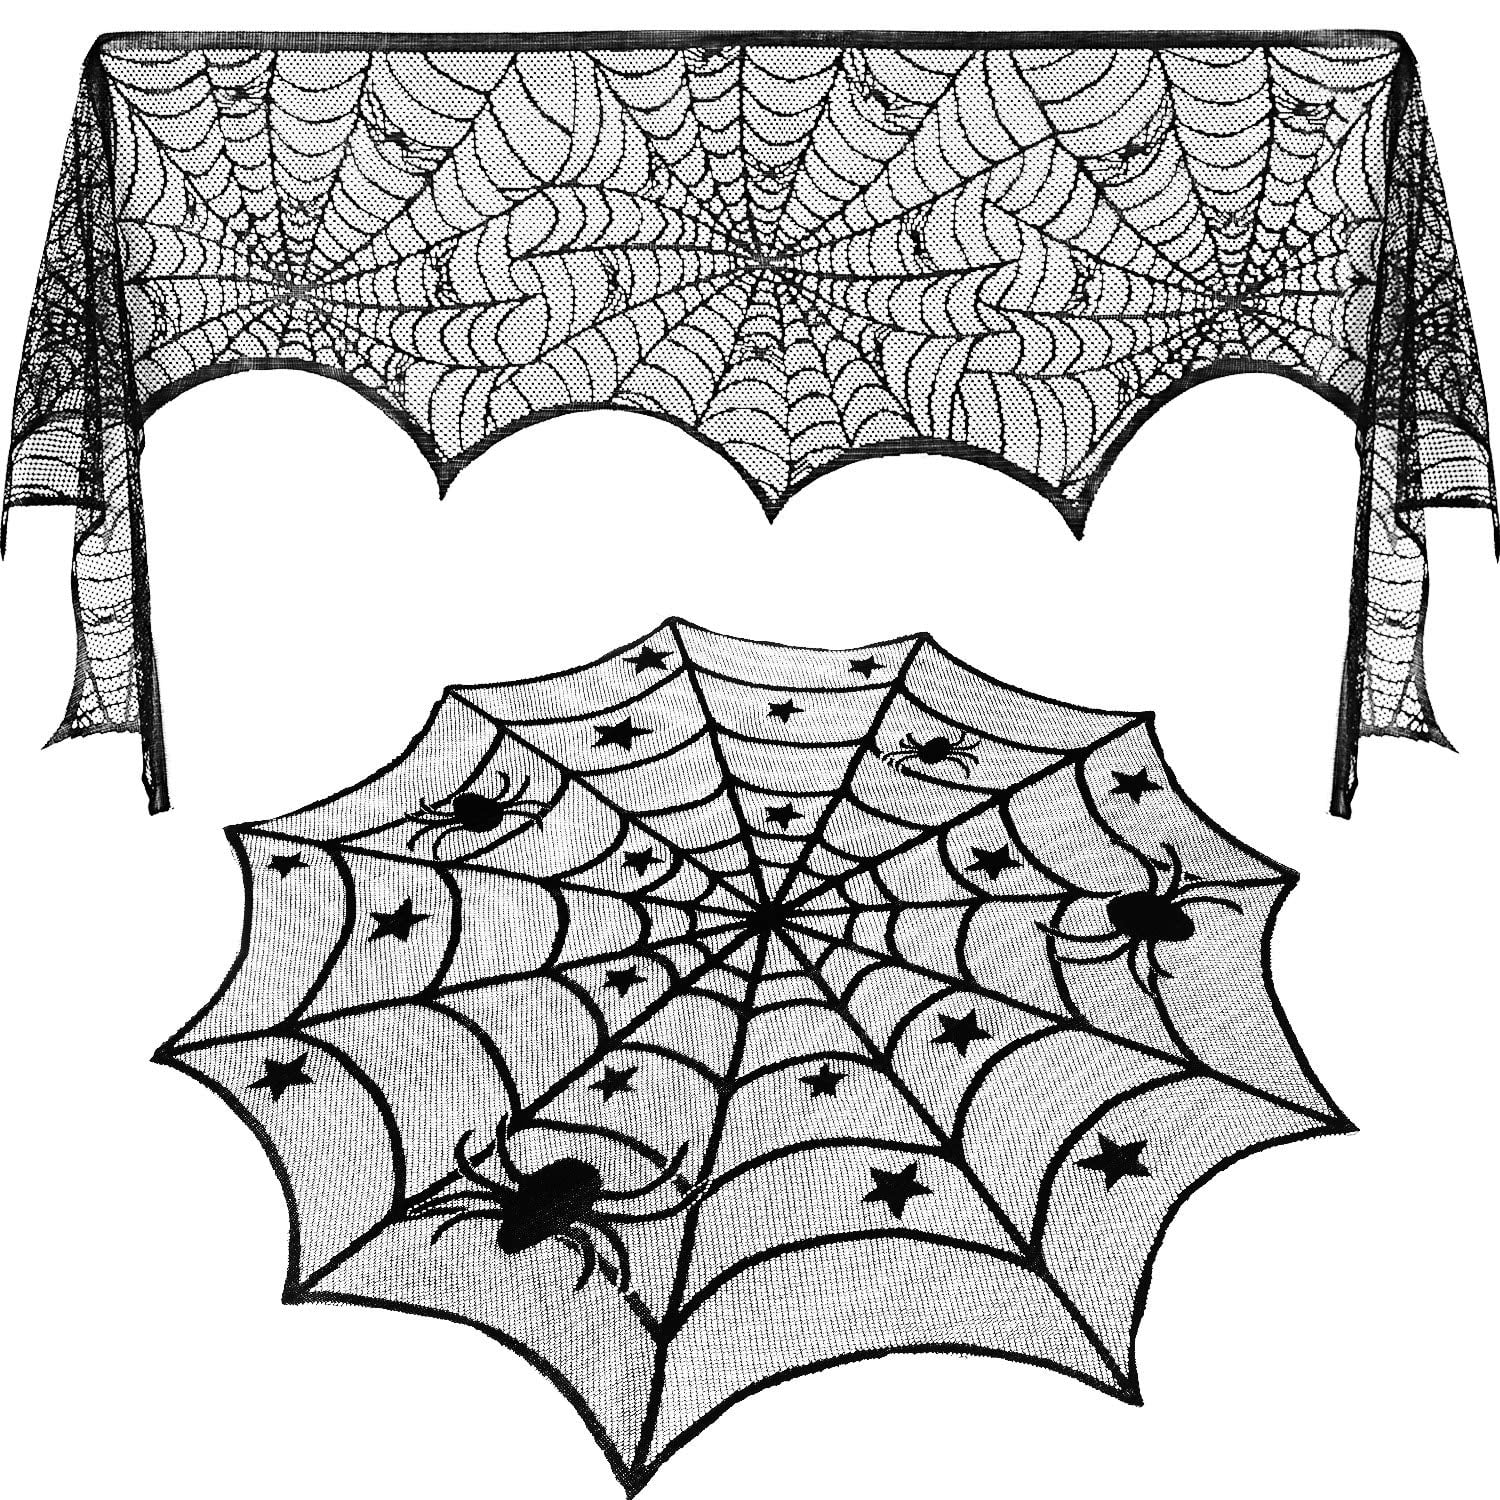 Details about    Spider web VINYL DECAL Sticker Free Shipping